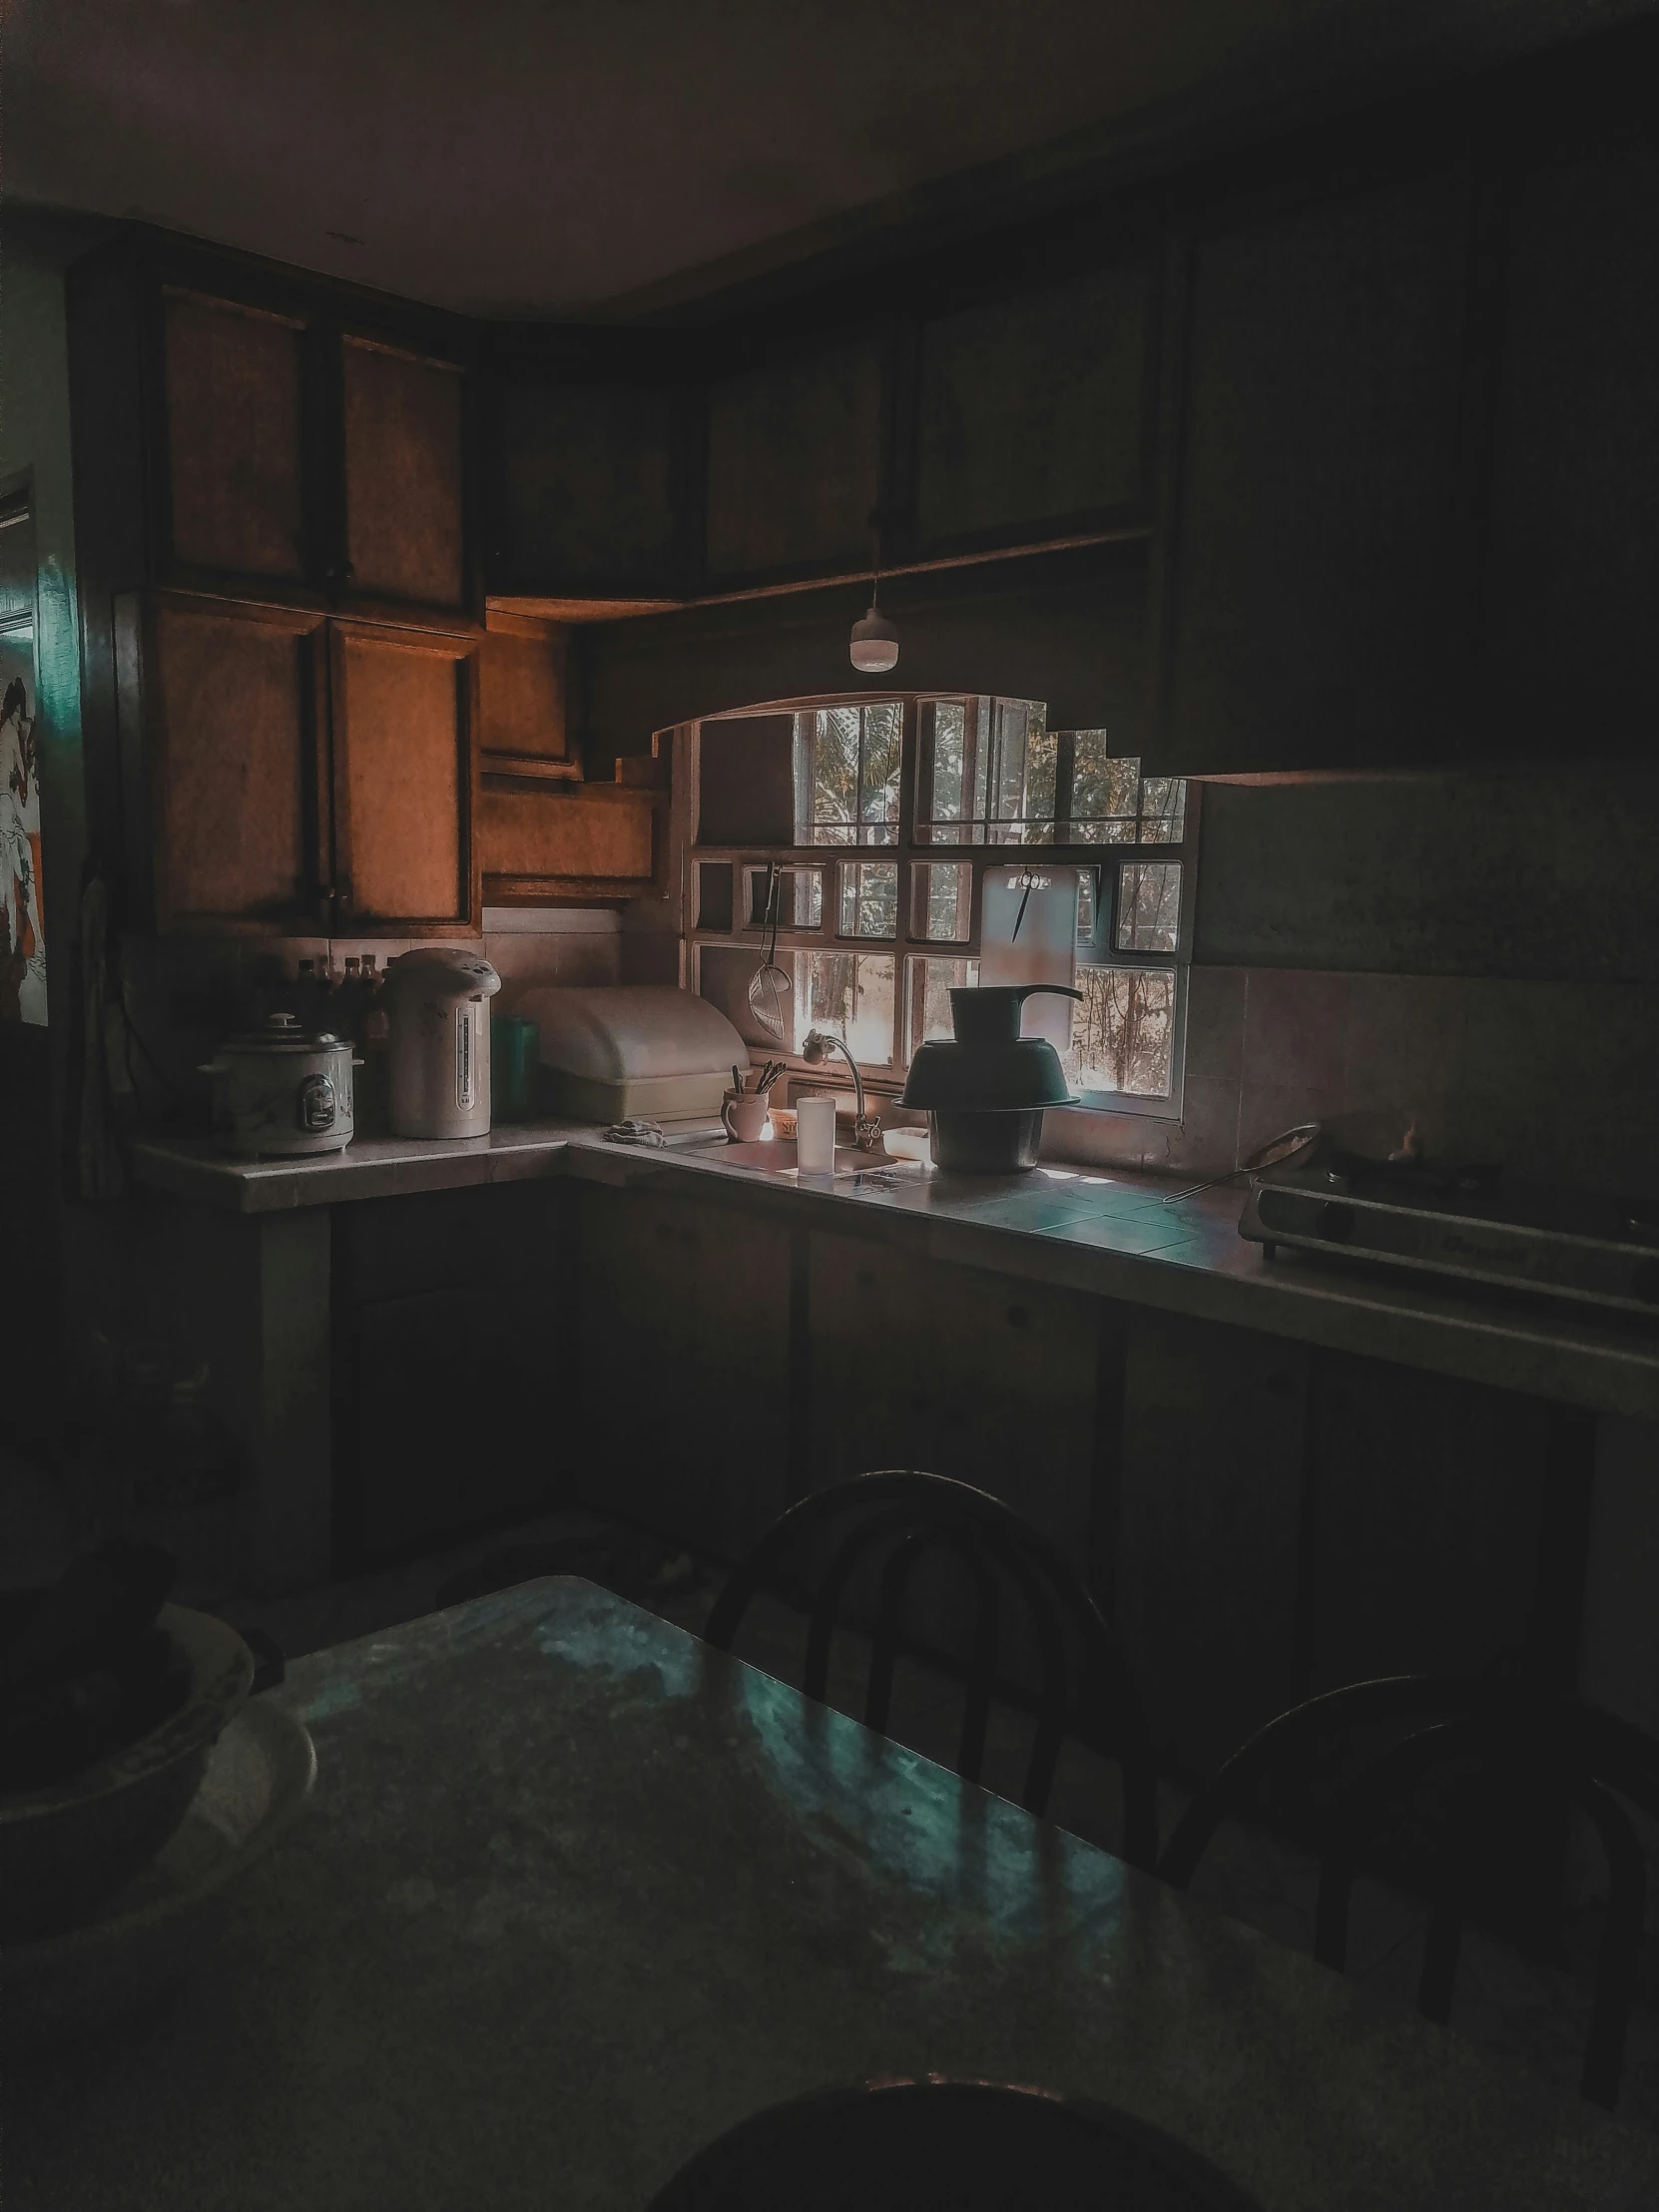 an old kitchen in the dark with glowing tile on the walls